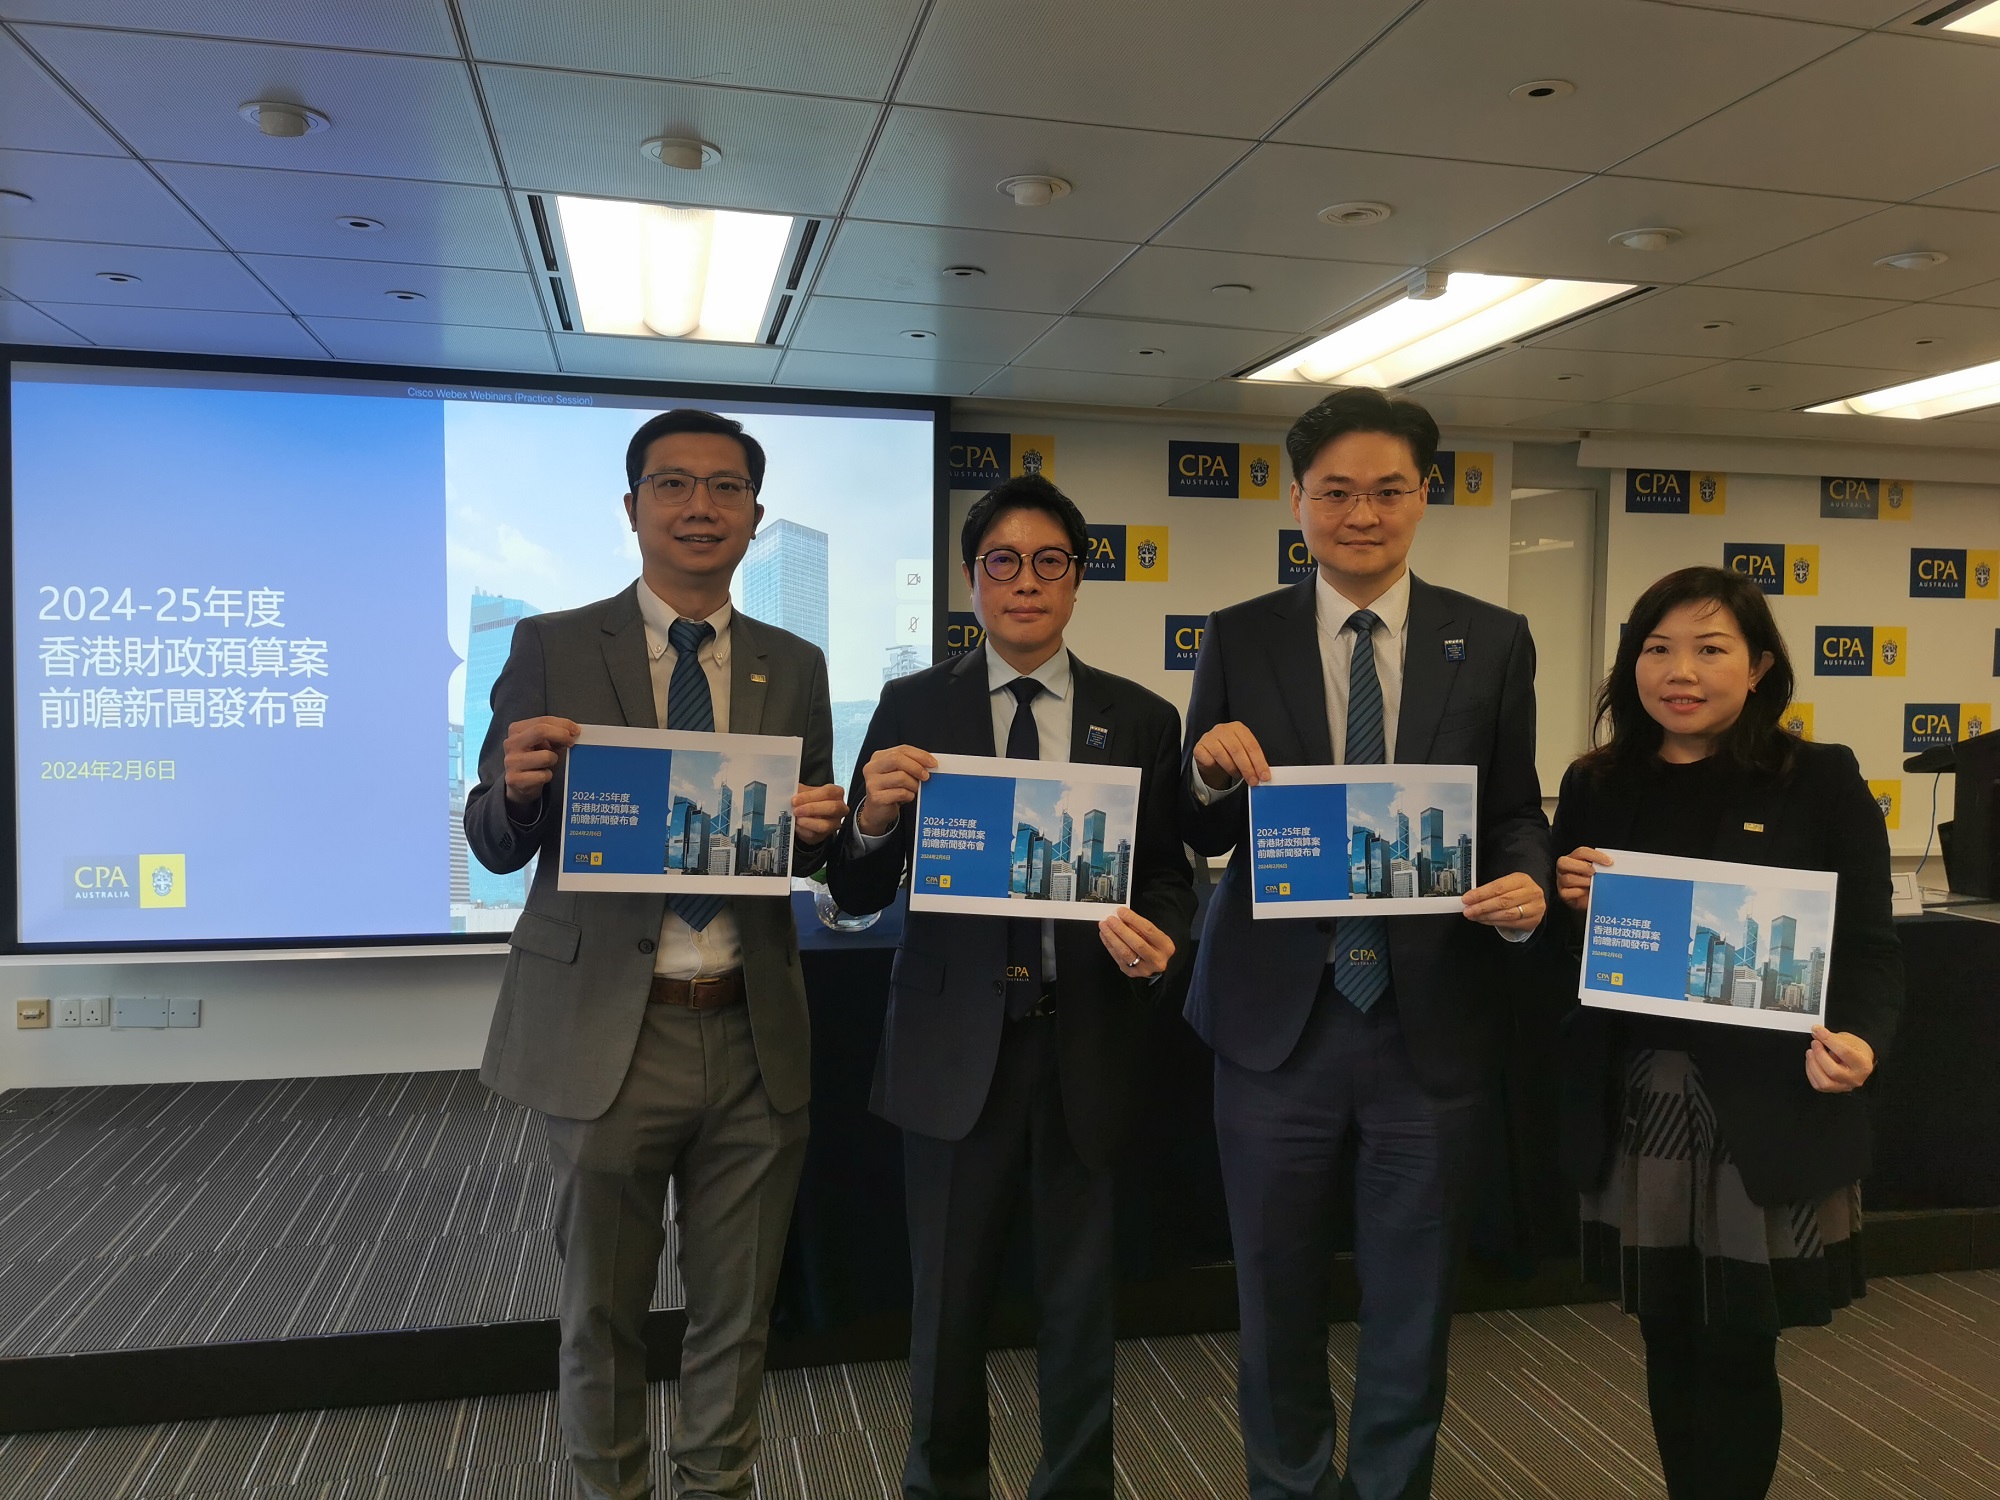 (from left to right) Mr Adam Chiu, Member of CPA Australia’s Taxation Committee – Greater China Mr Janssen Chan, Co-Chairperson of CPA Australia’s Taxation Committee – Greater China Mr Anthony Lau, Co-Chairperson of CPA Australia’s Taxation Committee – Greater China Ms Karina Wong, Divisional Deputy President and Deputy Chairperson of CPA Australia’s Taxation Committee – Greater China